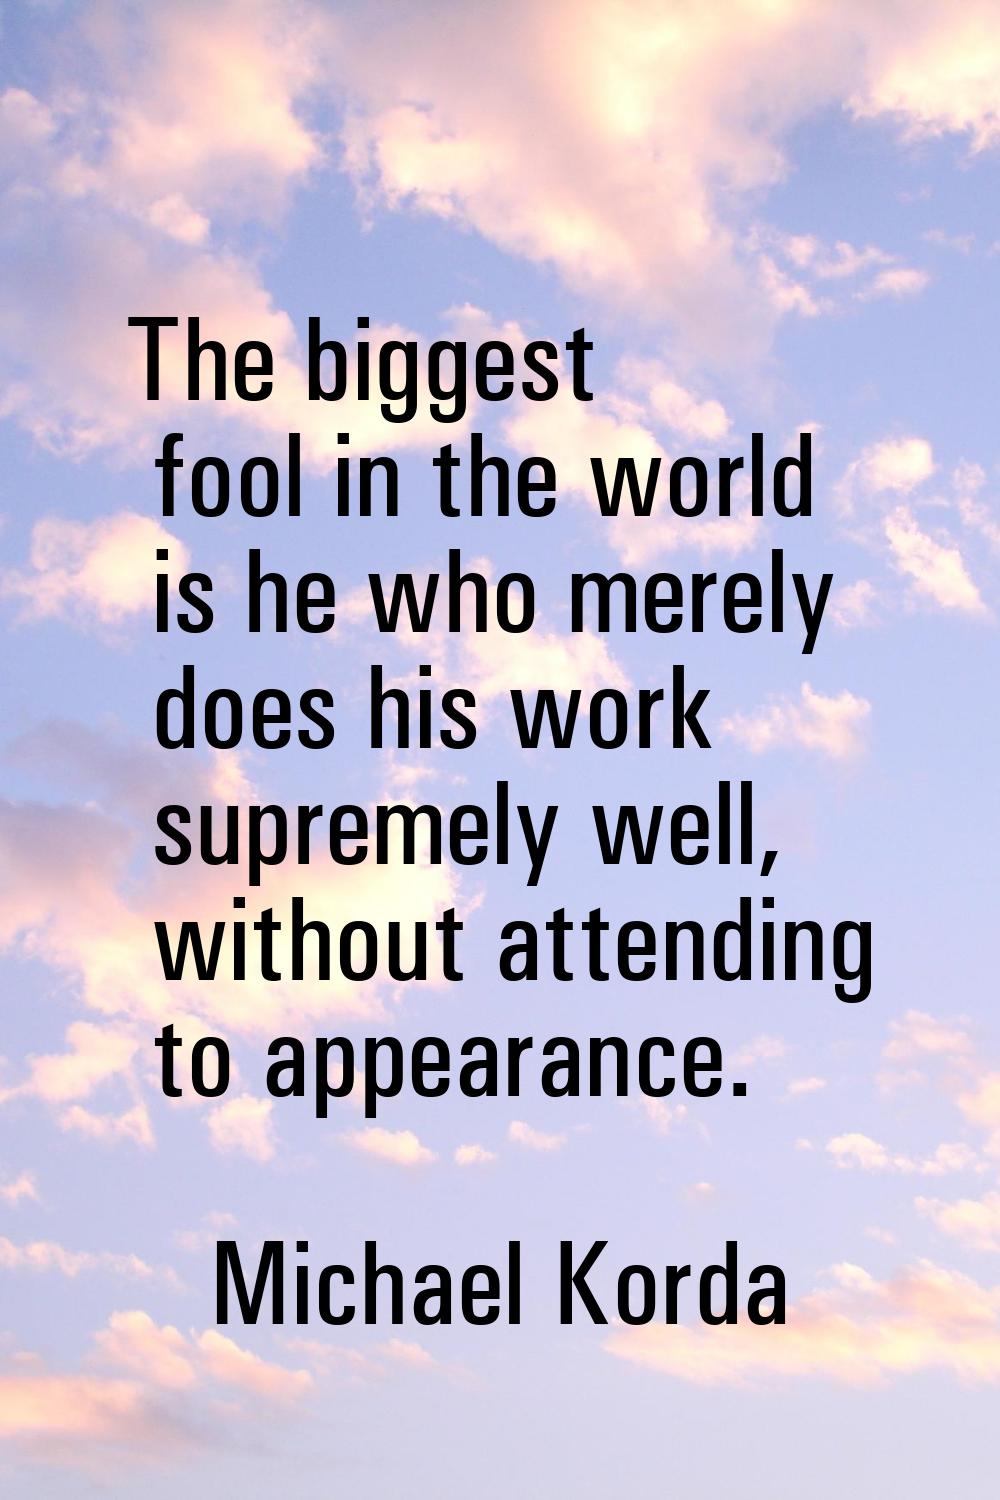 The biggest fool in the world is he who merely does his work supremely well, without attending to a